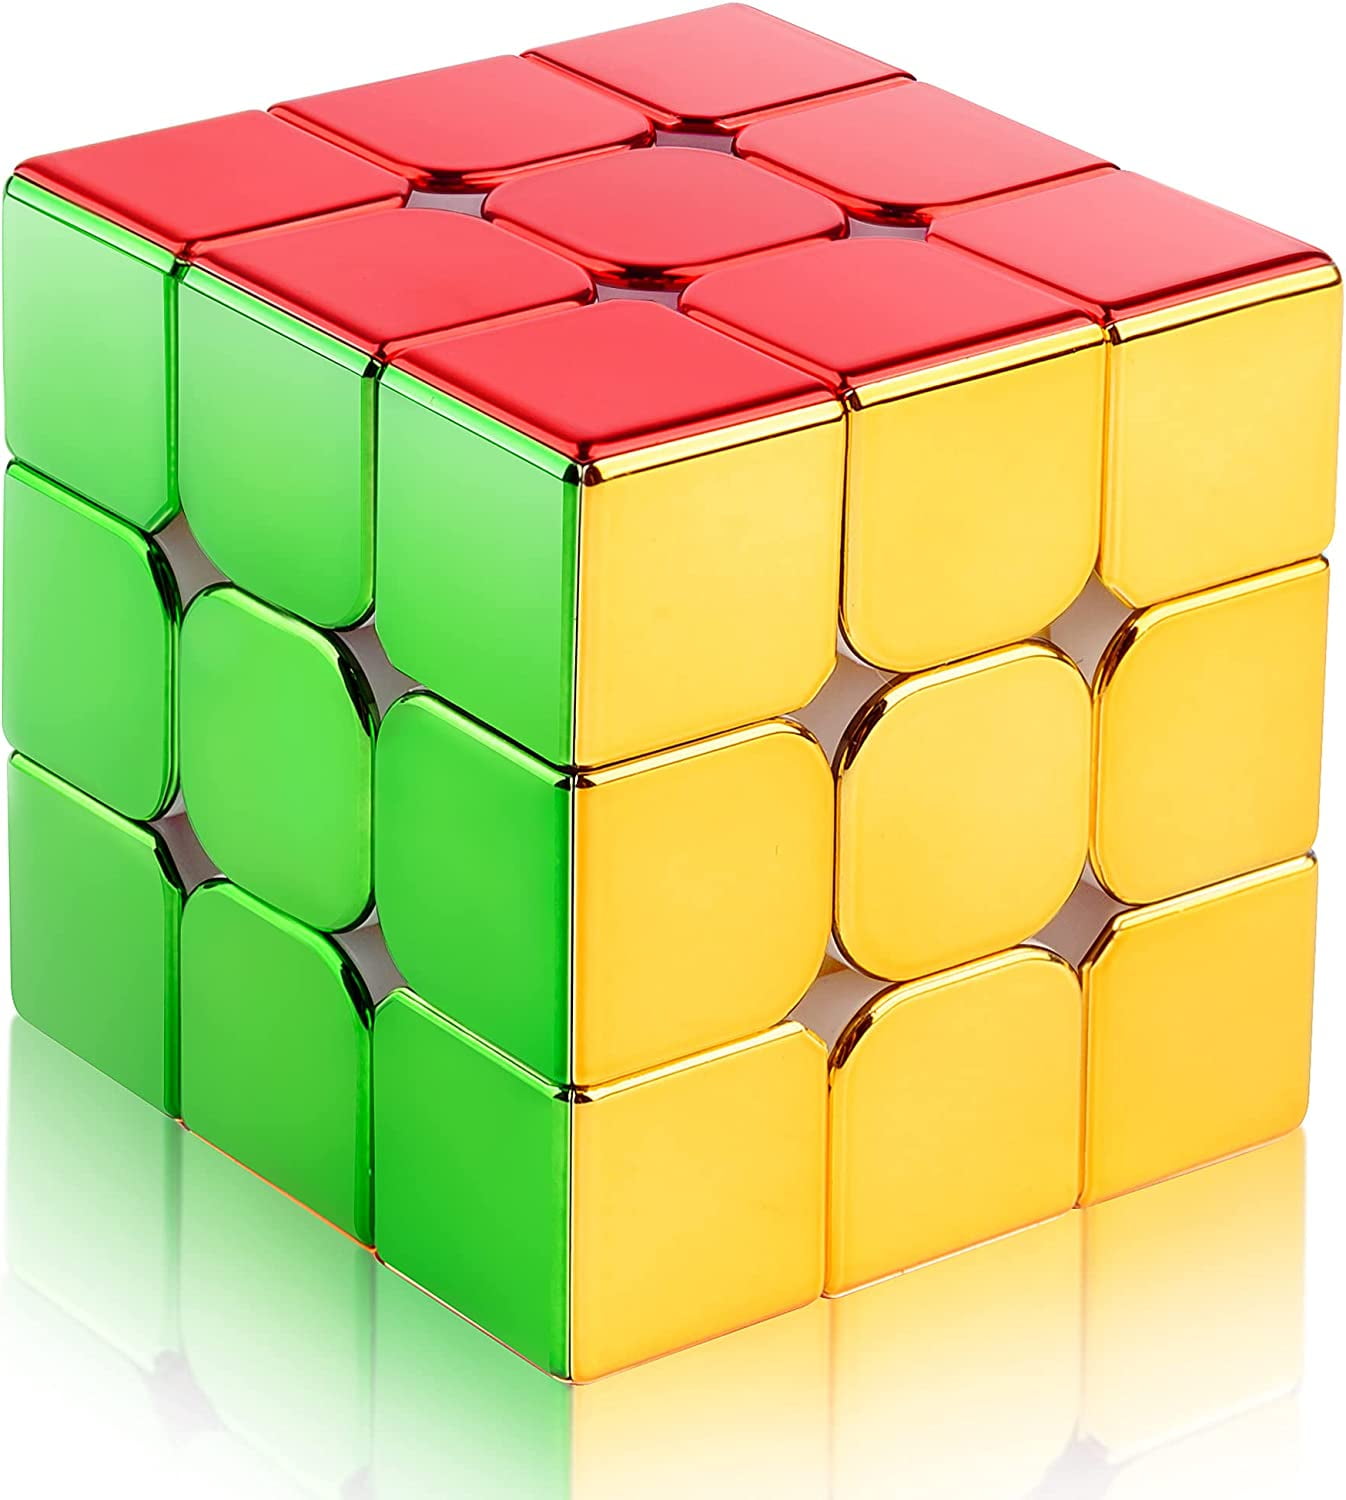 D-FantiX Cyclone Boys 3x3 Megaminx Stickerless Speed Cube Pentagonal  Dodecahedron Cube Puzzle Toy